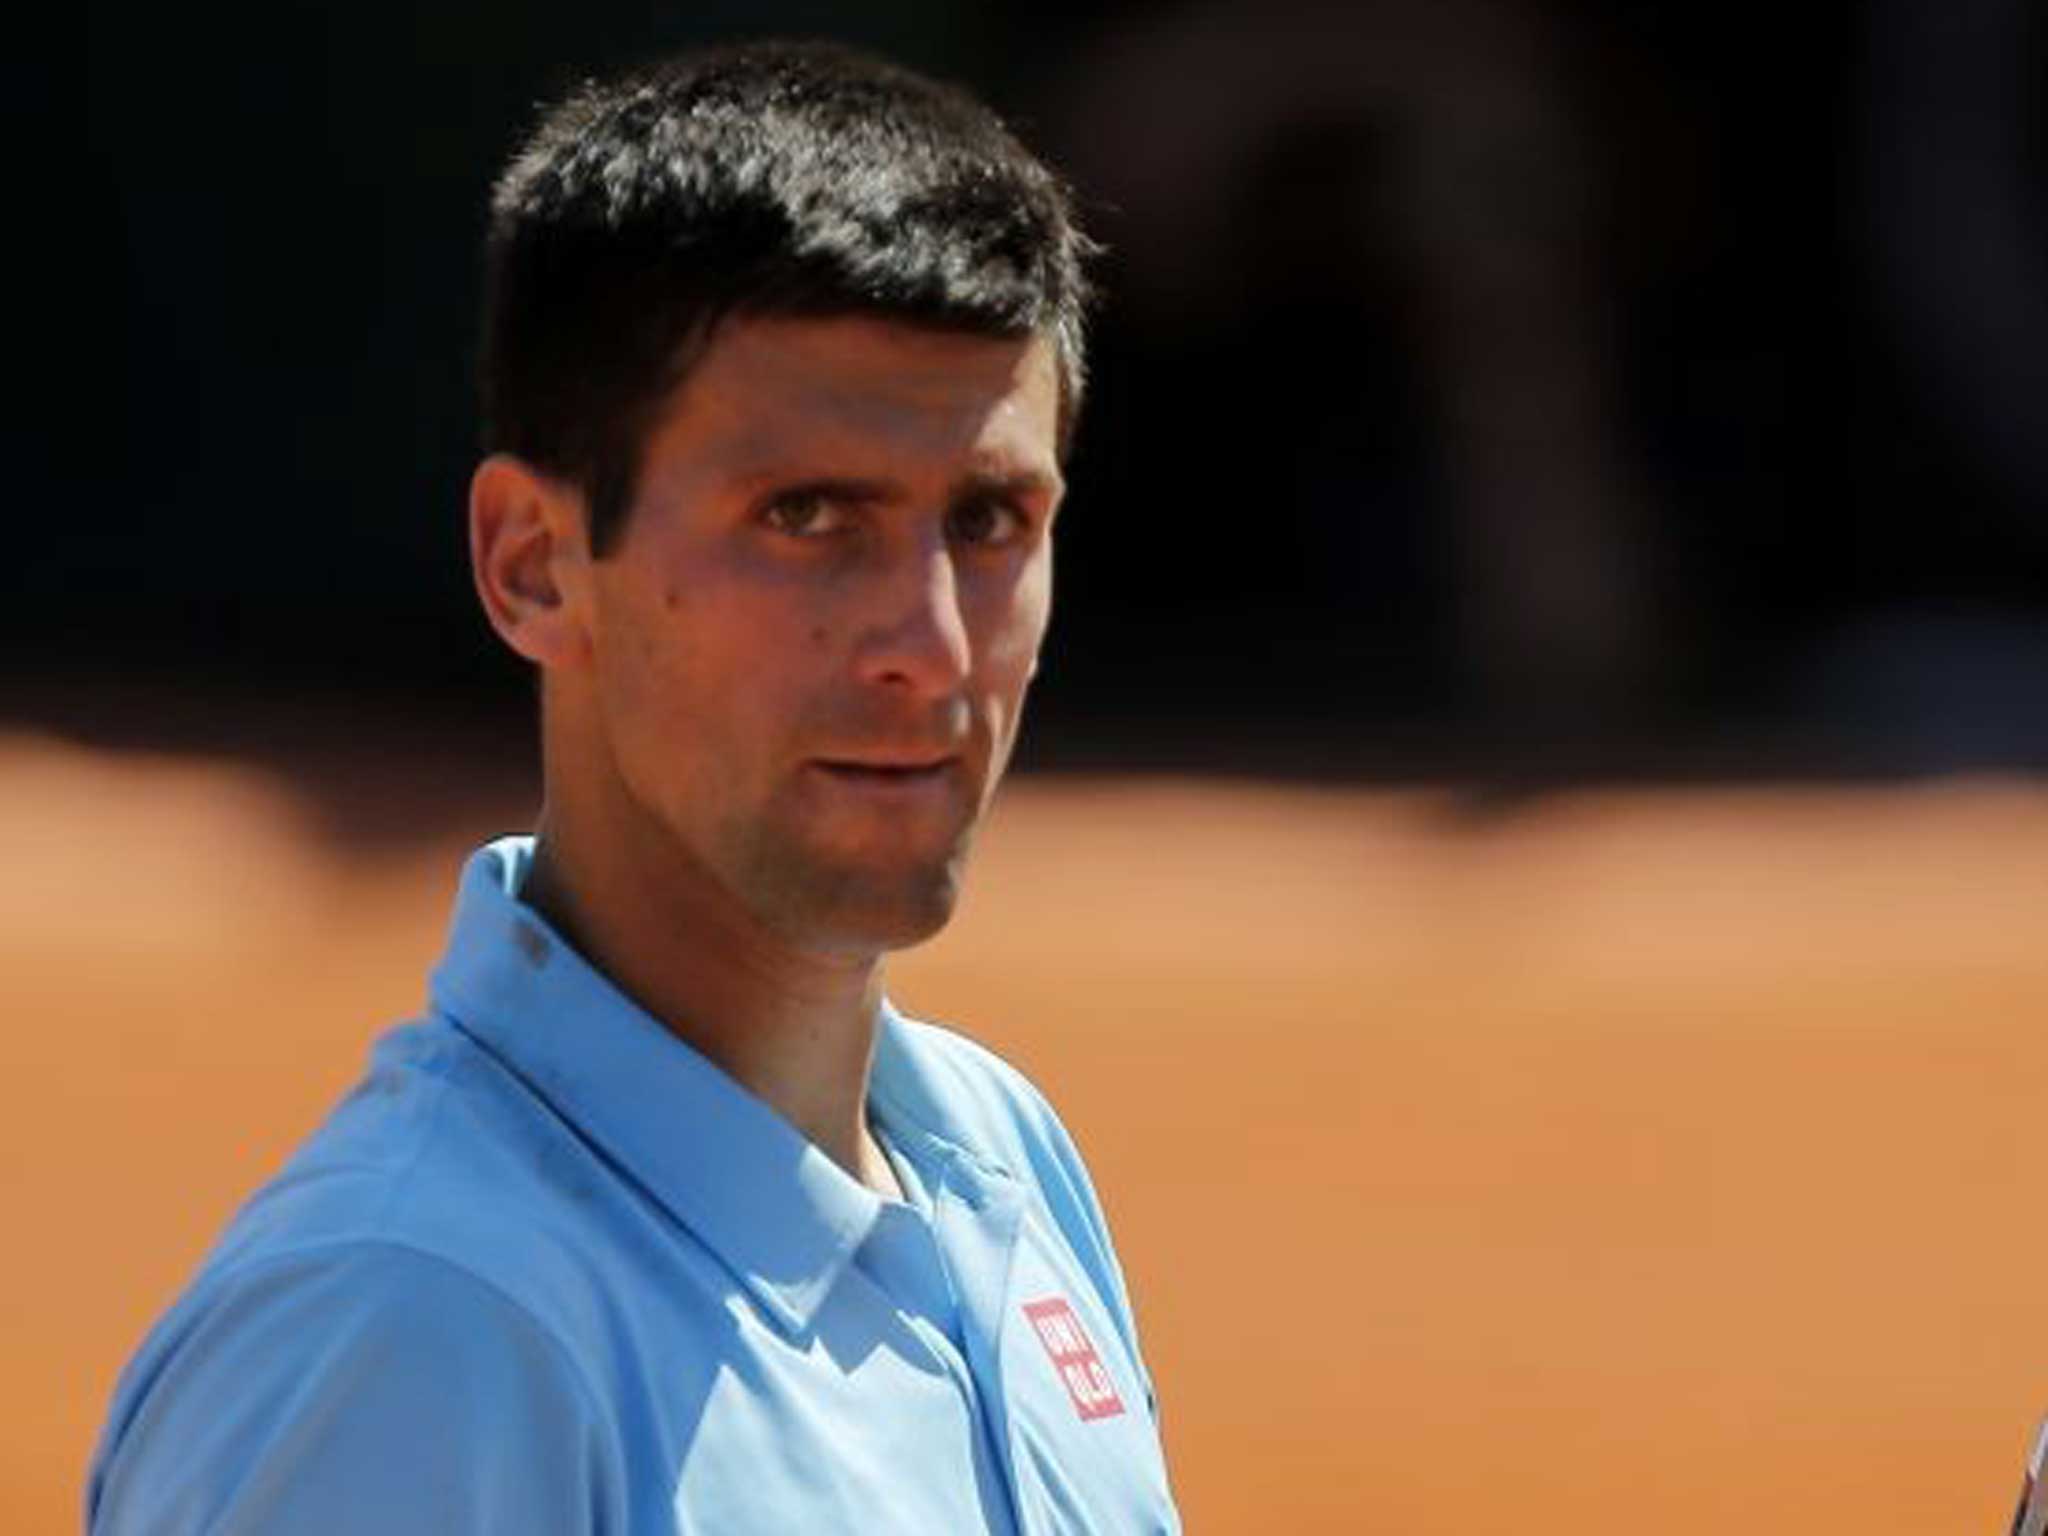 Clash of titans: Rafael Nadal has beaten Novak Djokovic in all five of their meetings at Roland Garros but the Serb has been getting closer